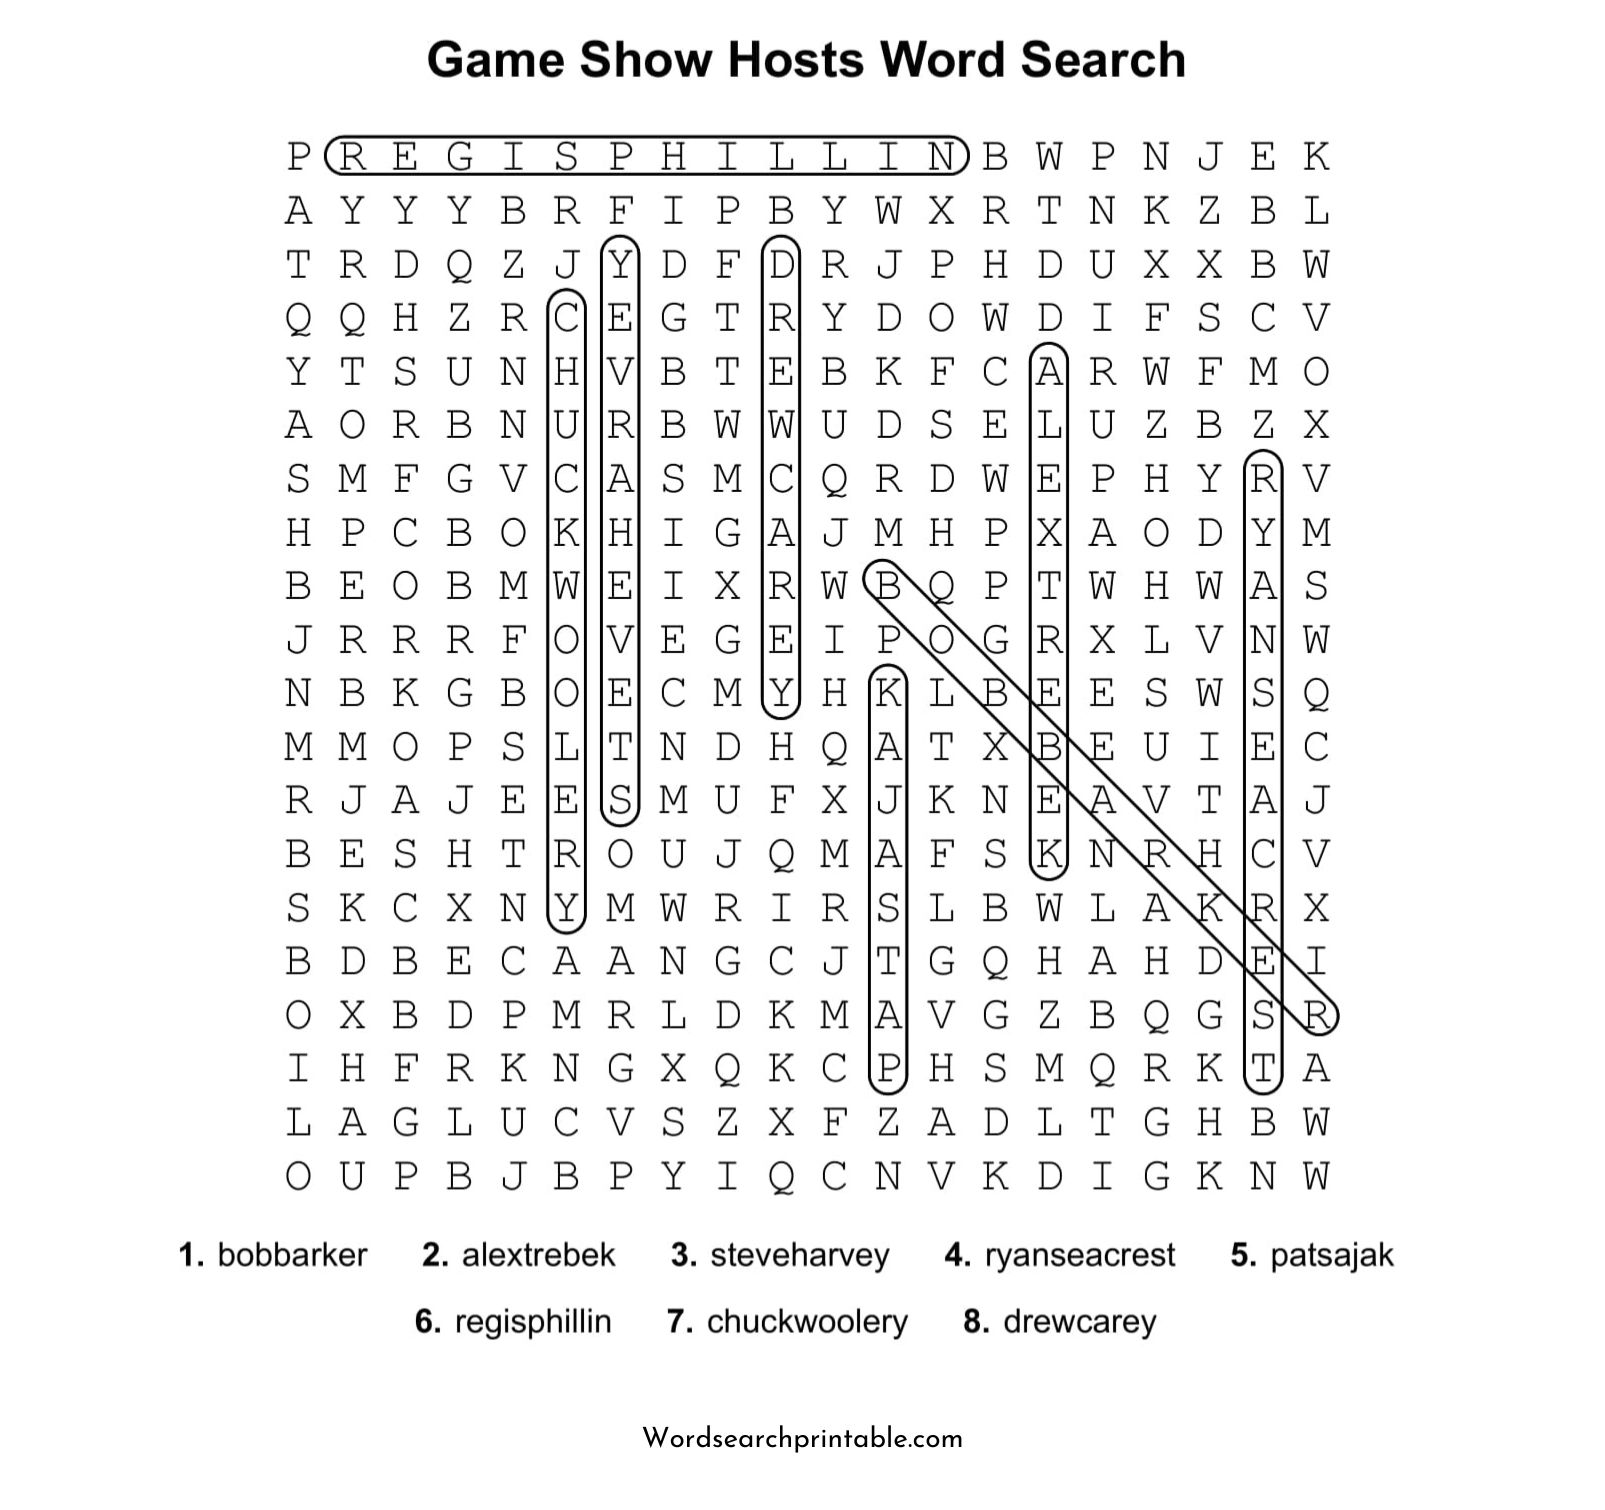 game show hosts word search puzzle solution